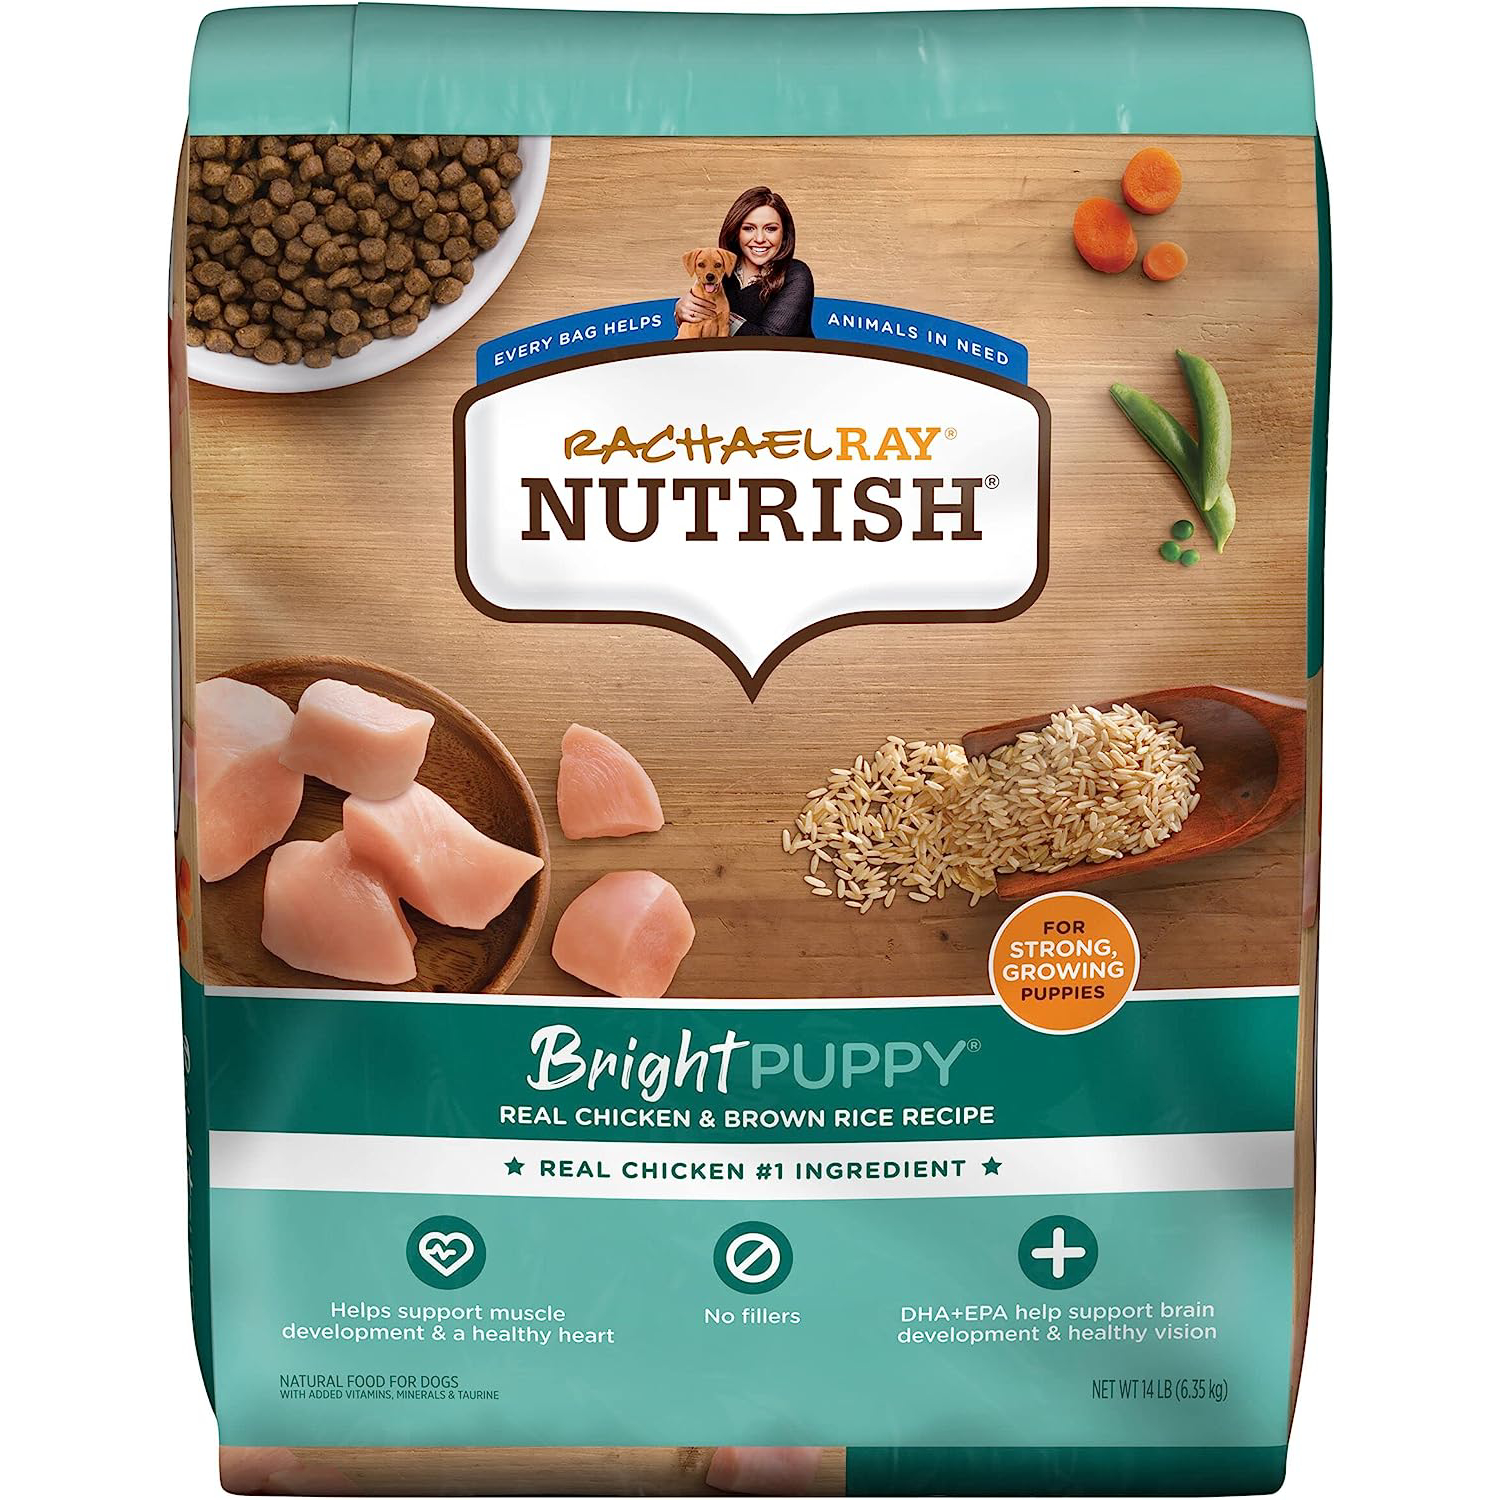 New Project Rachael Ray Nutrish Bright Puppy Premium Natural Dry Dog Food 